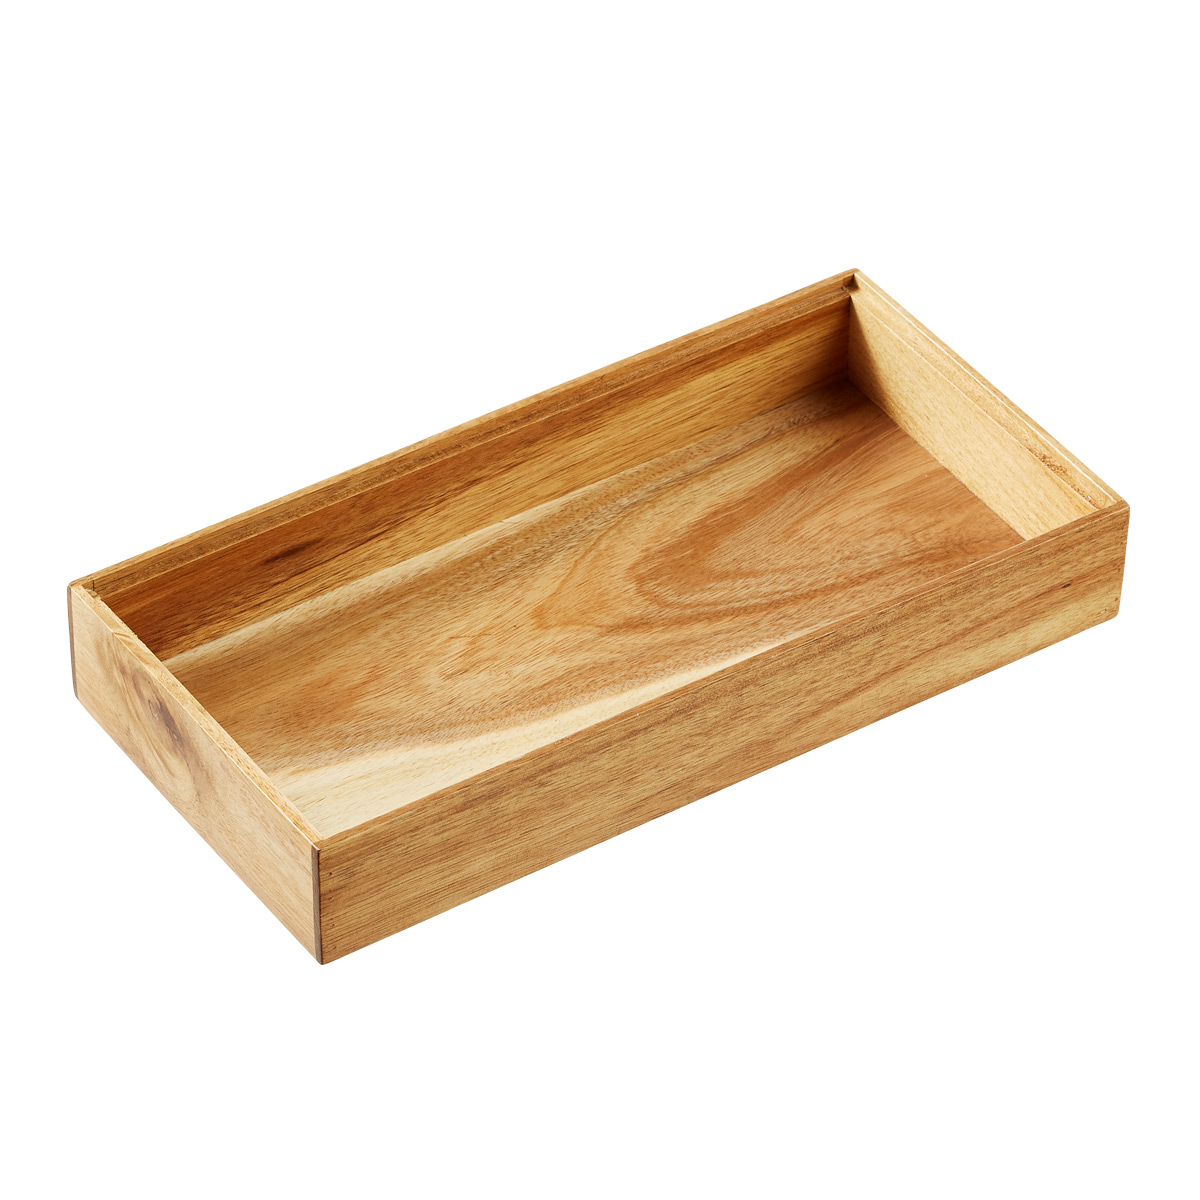 https://www.containerstore.com/catalogimages/382122/10079625-acacia-stacking-drawer-orga.jpg